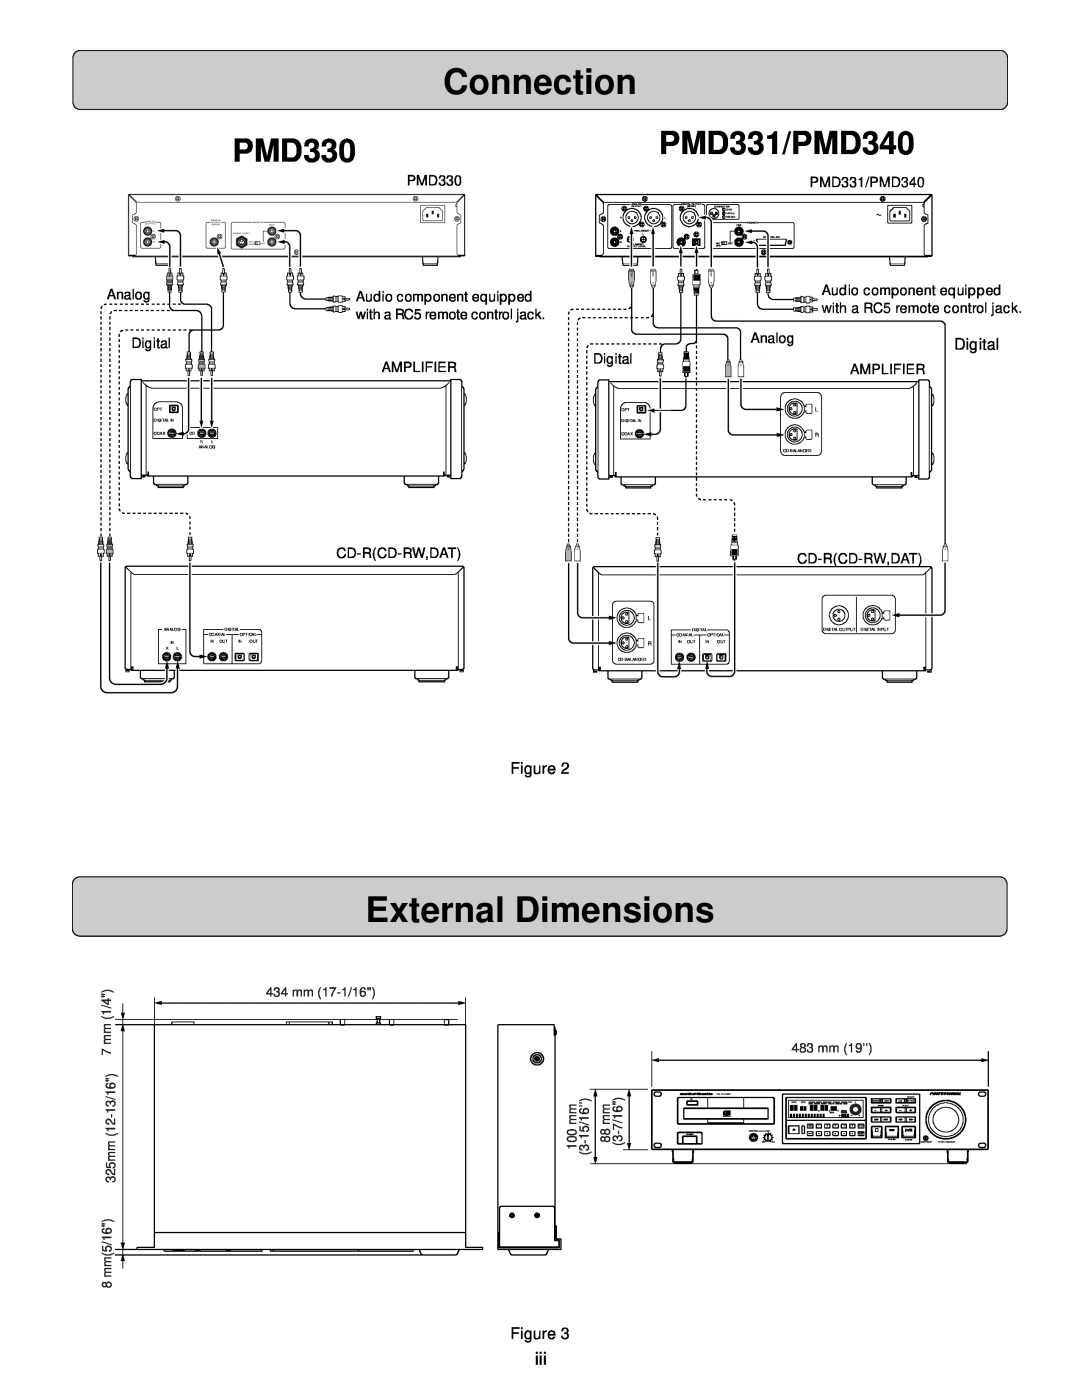 Denon manual Connection, External Dimensions, PMD330PMD331/PMD340 